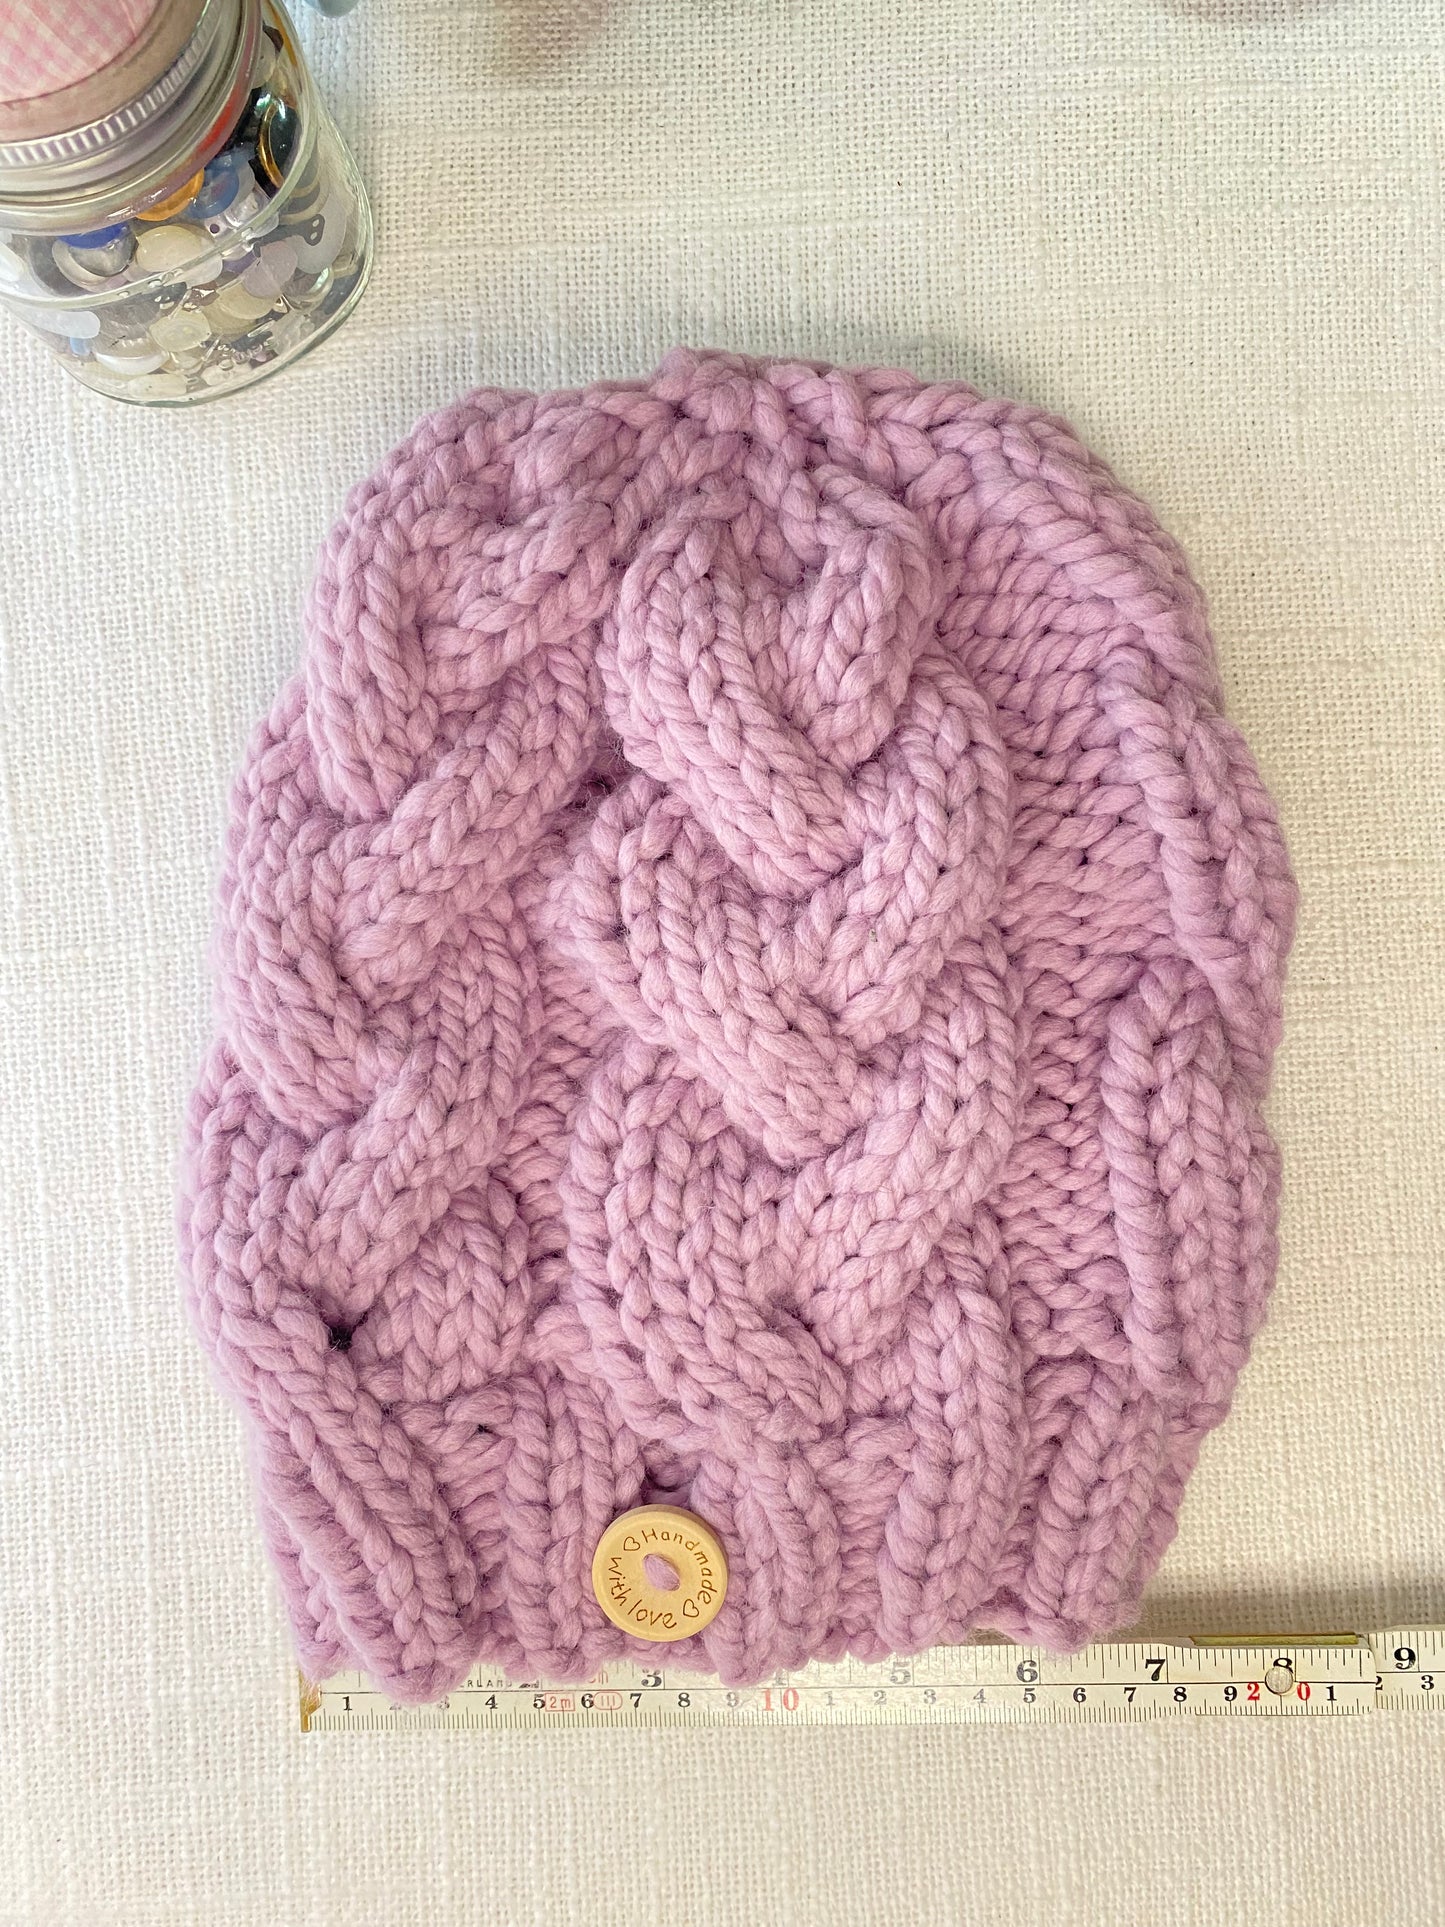 Cozy Cables Hat - Wool Blend Fiber in Black Raspberry Ice Cream